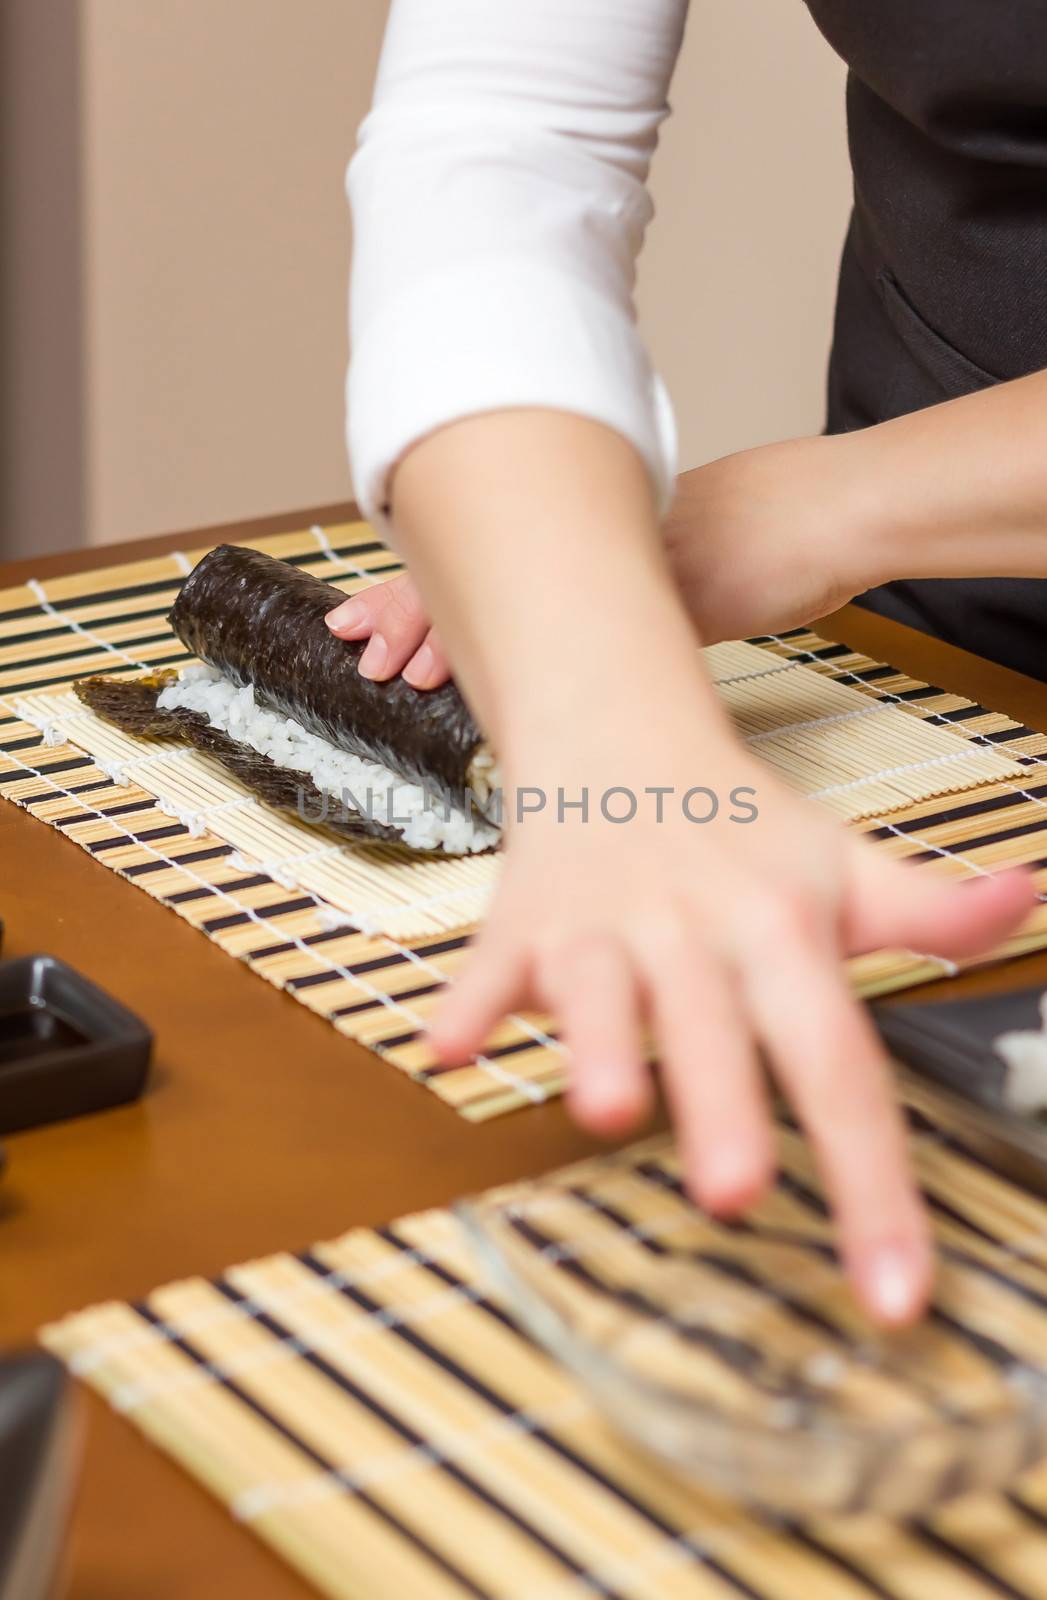 Woman hand moistening with water a edge of japanese sushi to close the roll. Selective focus on the sushi roll